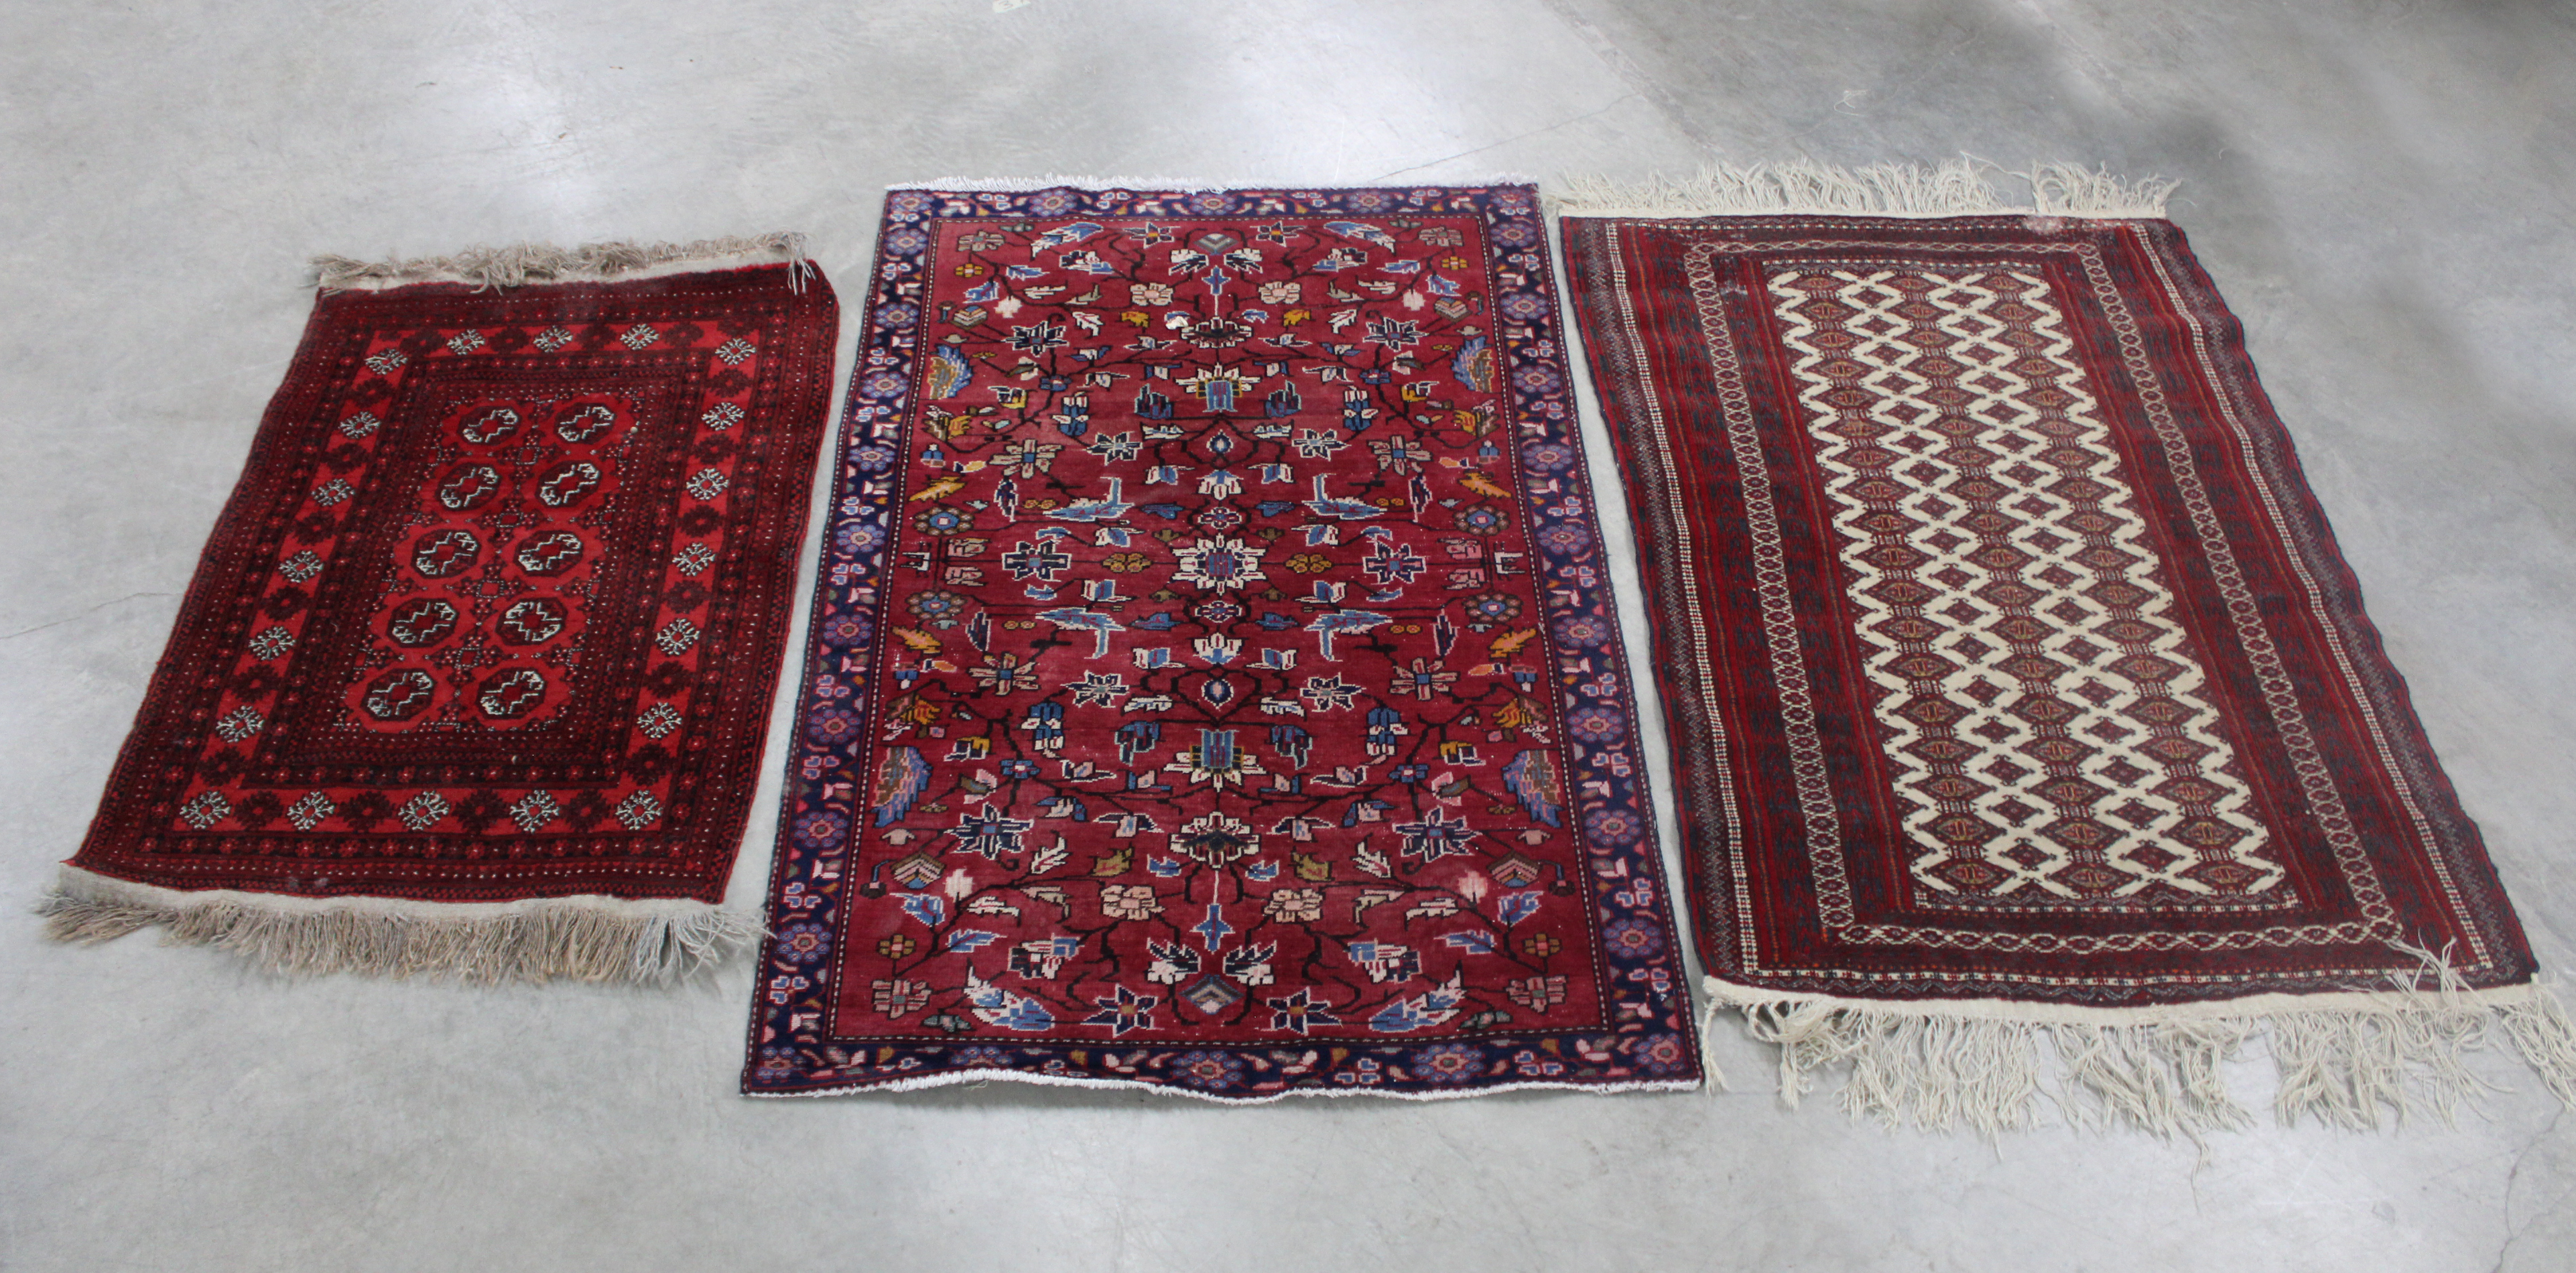 3 MISC PERSIAN SCATTER RUGS 3 2c8b60